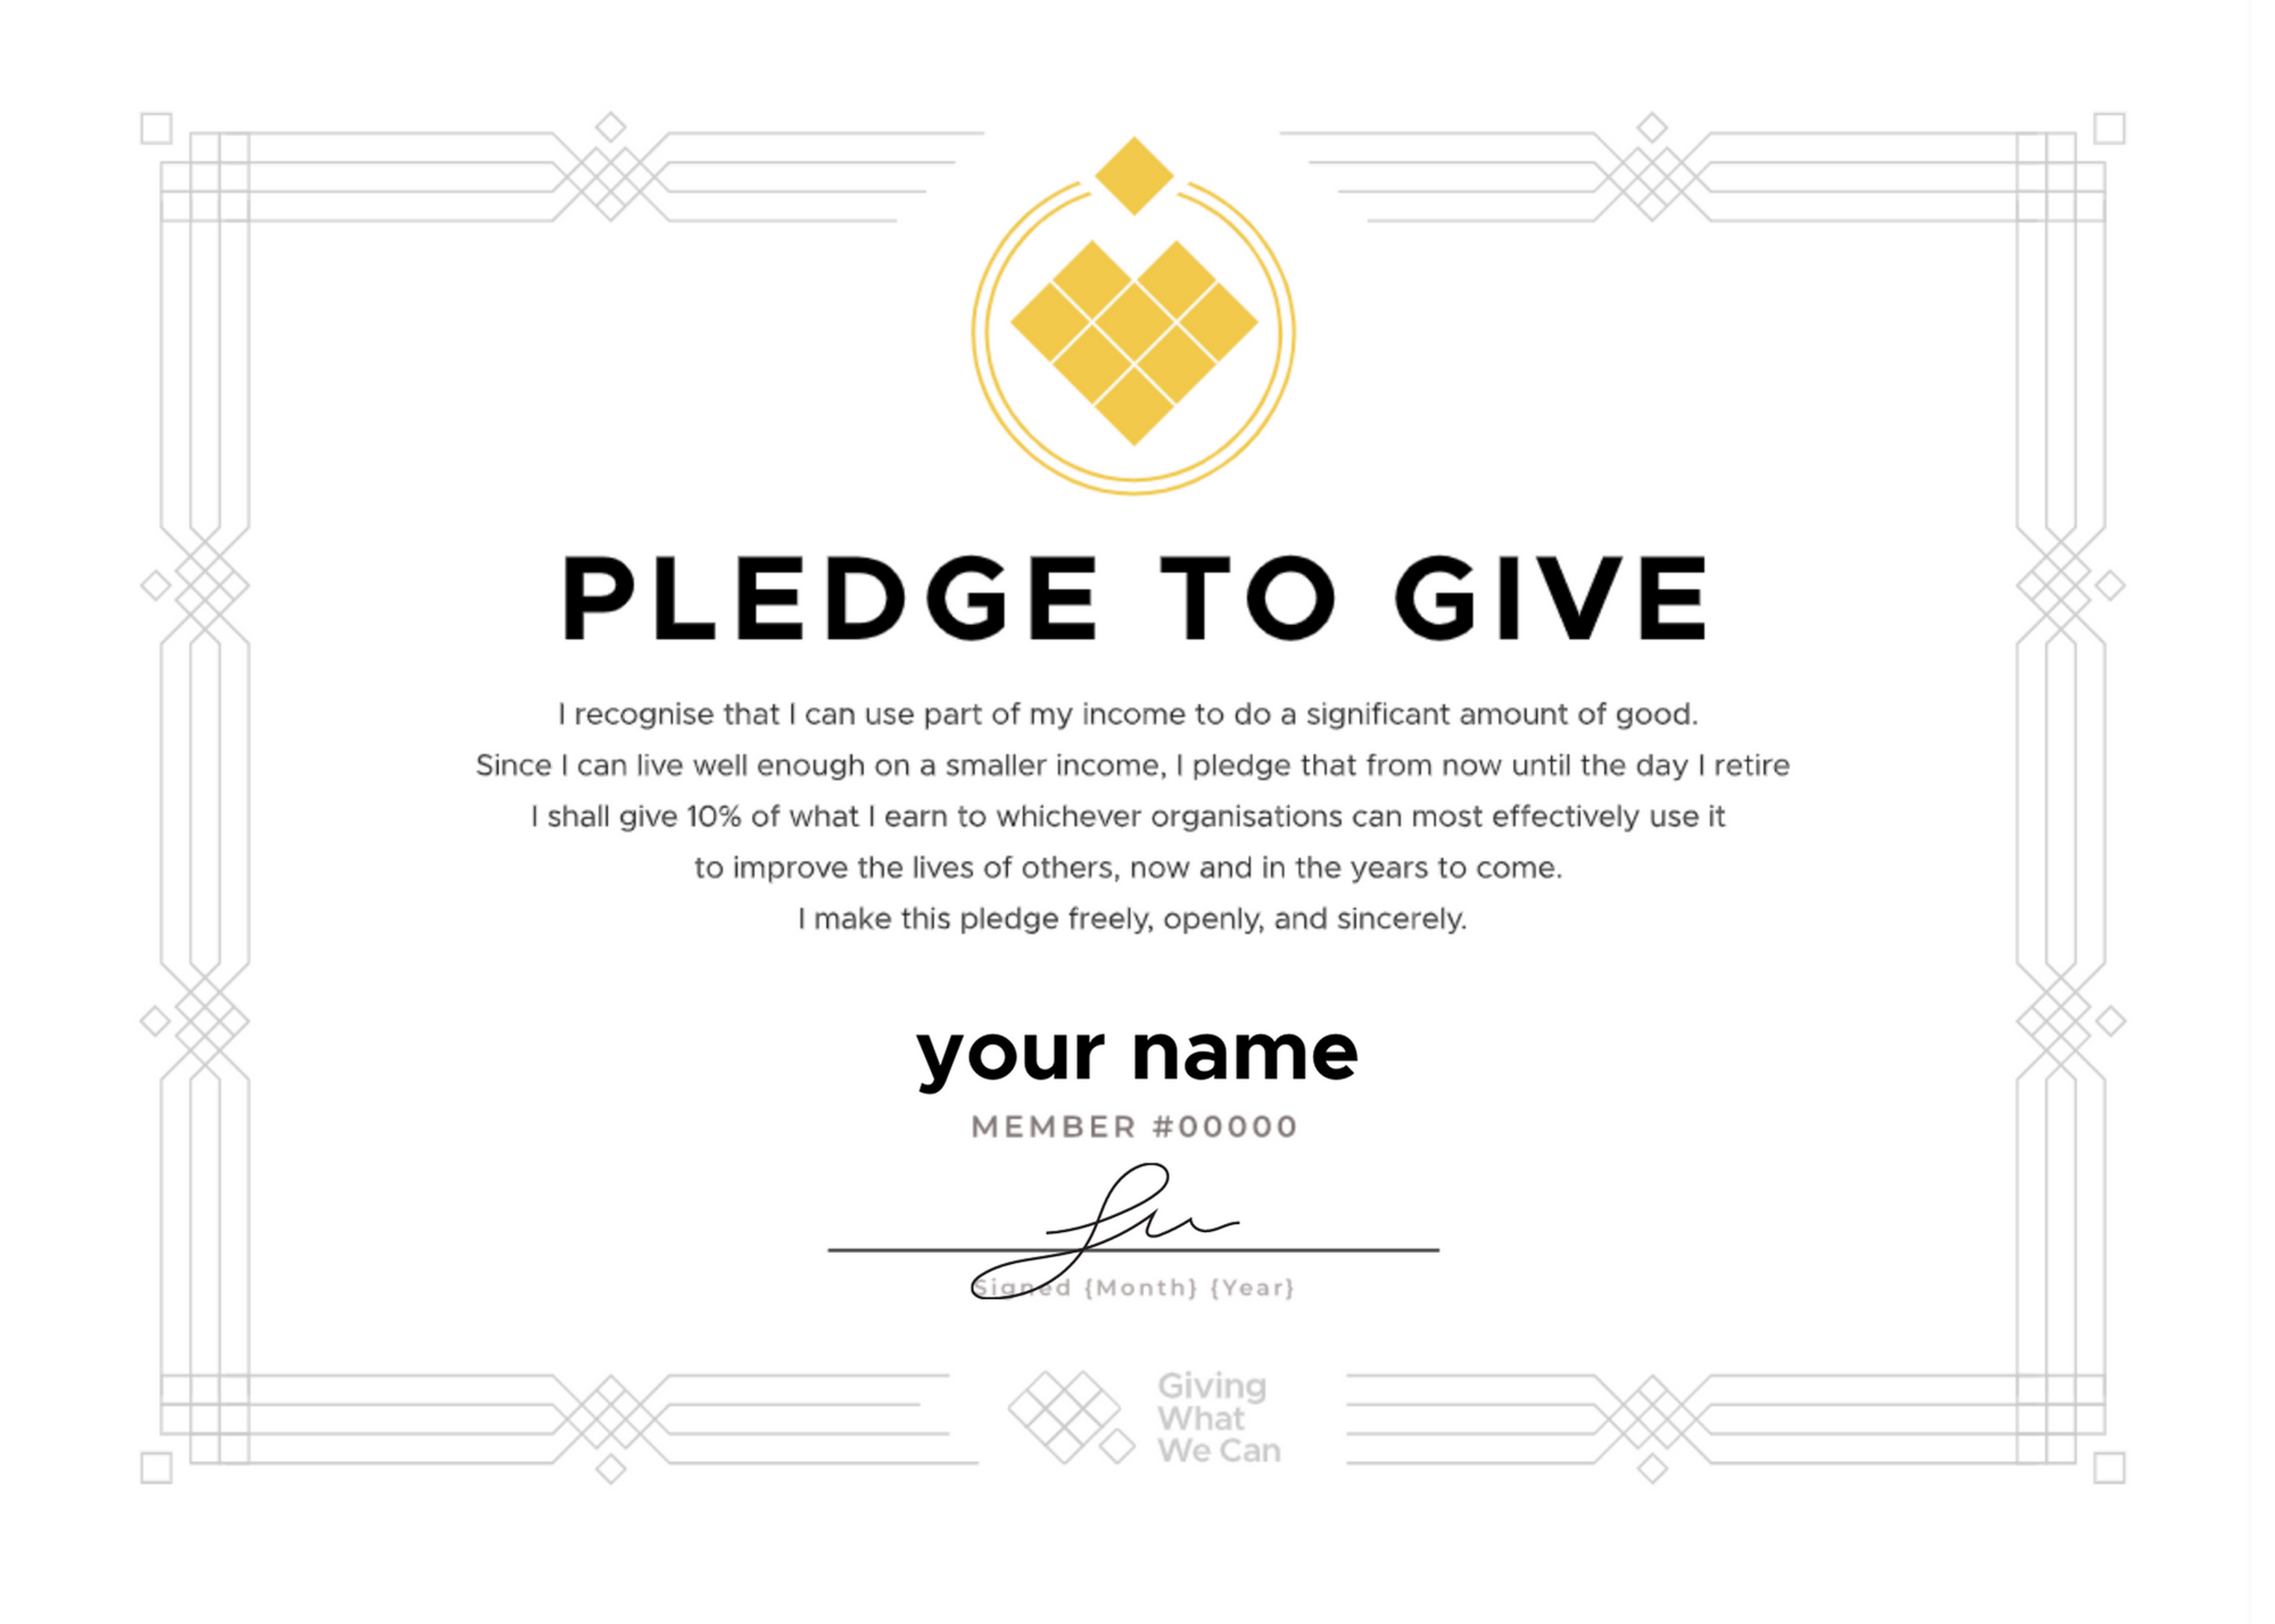 Picture of the pledge certificate that reads "Pledge to Give - "I recognise that I can use part of my income to do a significant amount of good. Since I can live well enough on a smaller income, I pledge that from __ until __ I shall give _% of what I earn to whichever organisations can most effectively use it to improve the lives of others, now and in the years to come. I make this pledge freely, openly, and sincerely."